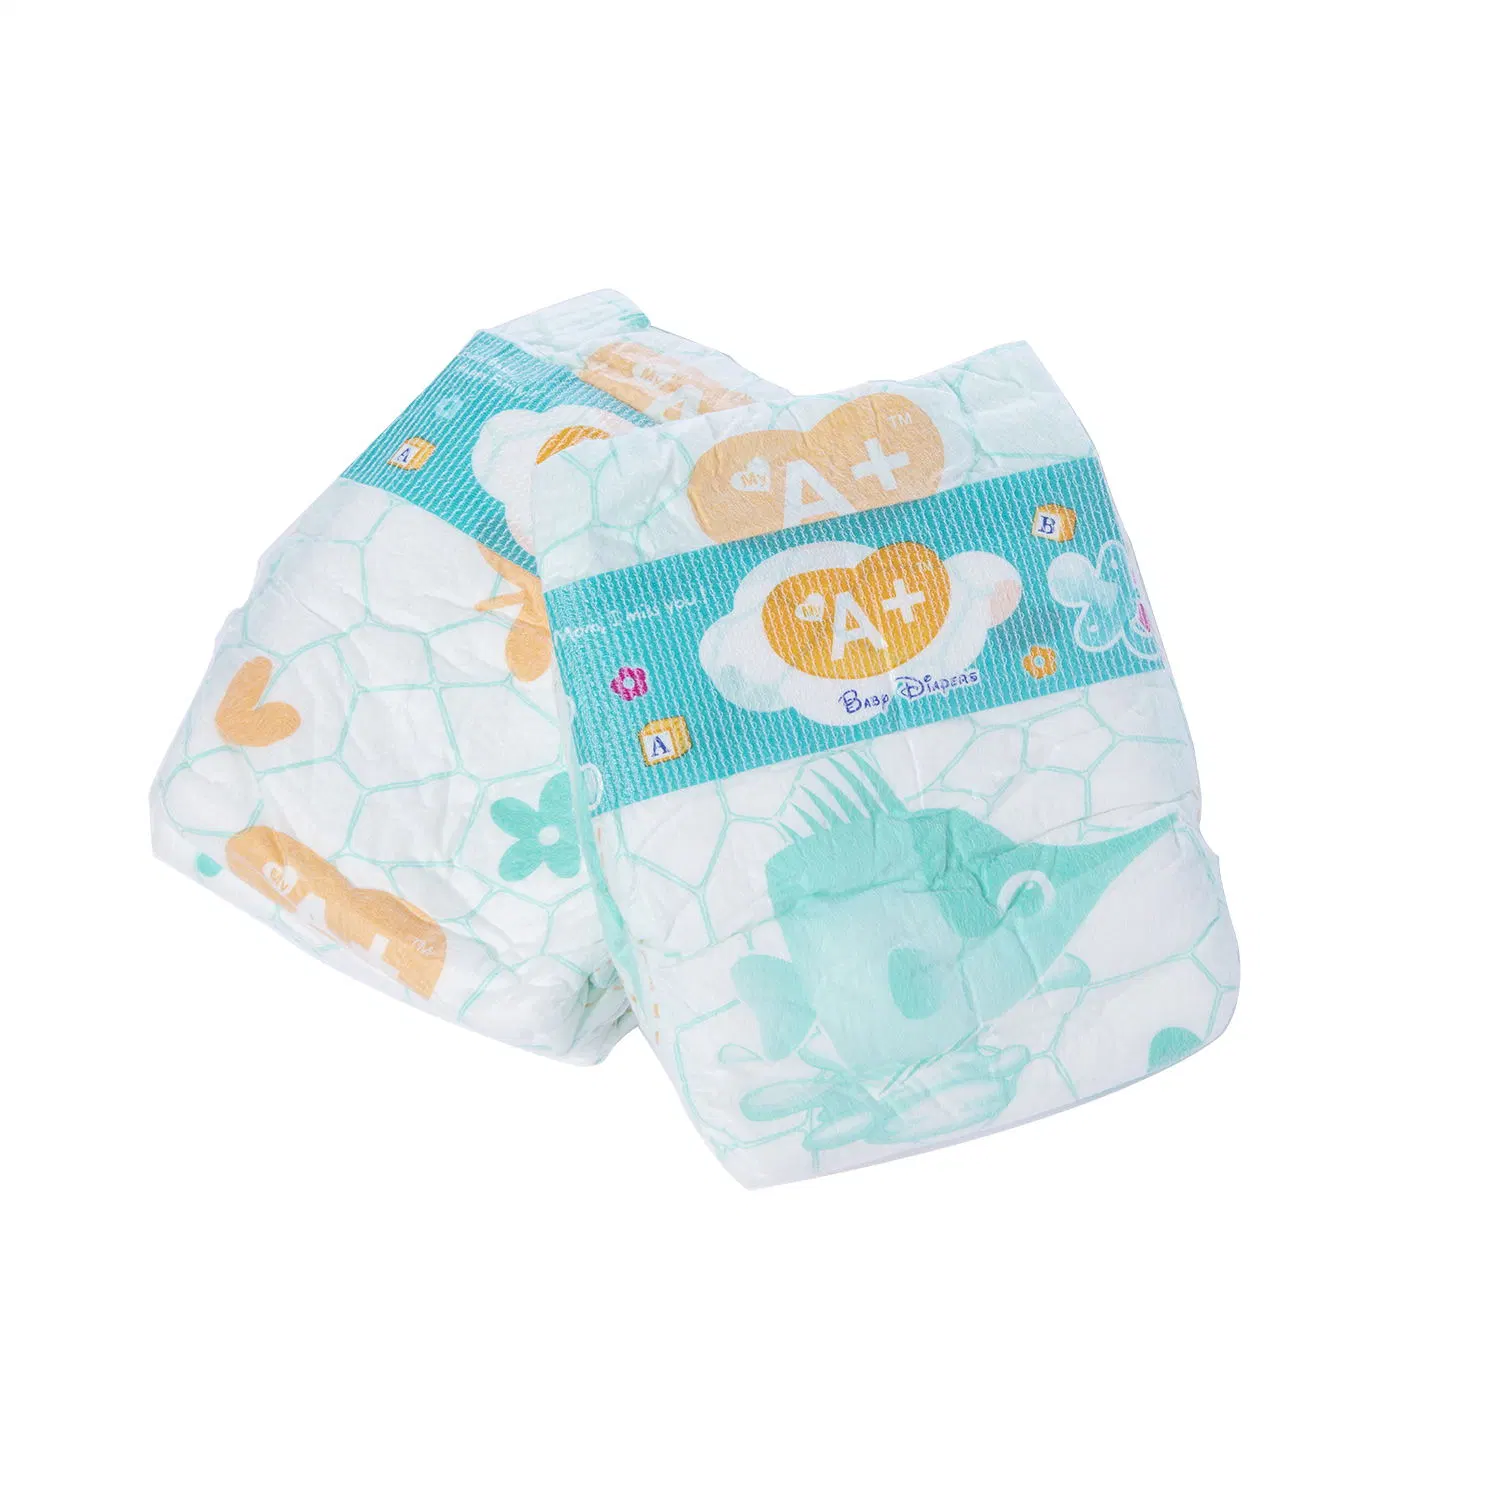 Wholesale/Supplier Soft Breathable Nice Baby Care Pull up Diaper Disposable Napkin with Big Elastic Waistband in Bale Manufacture